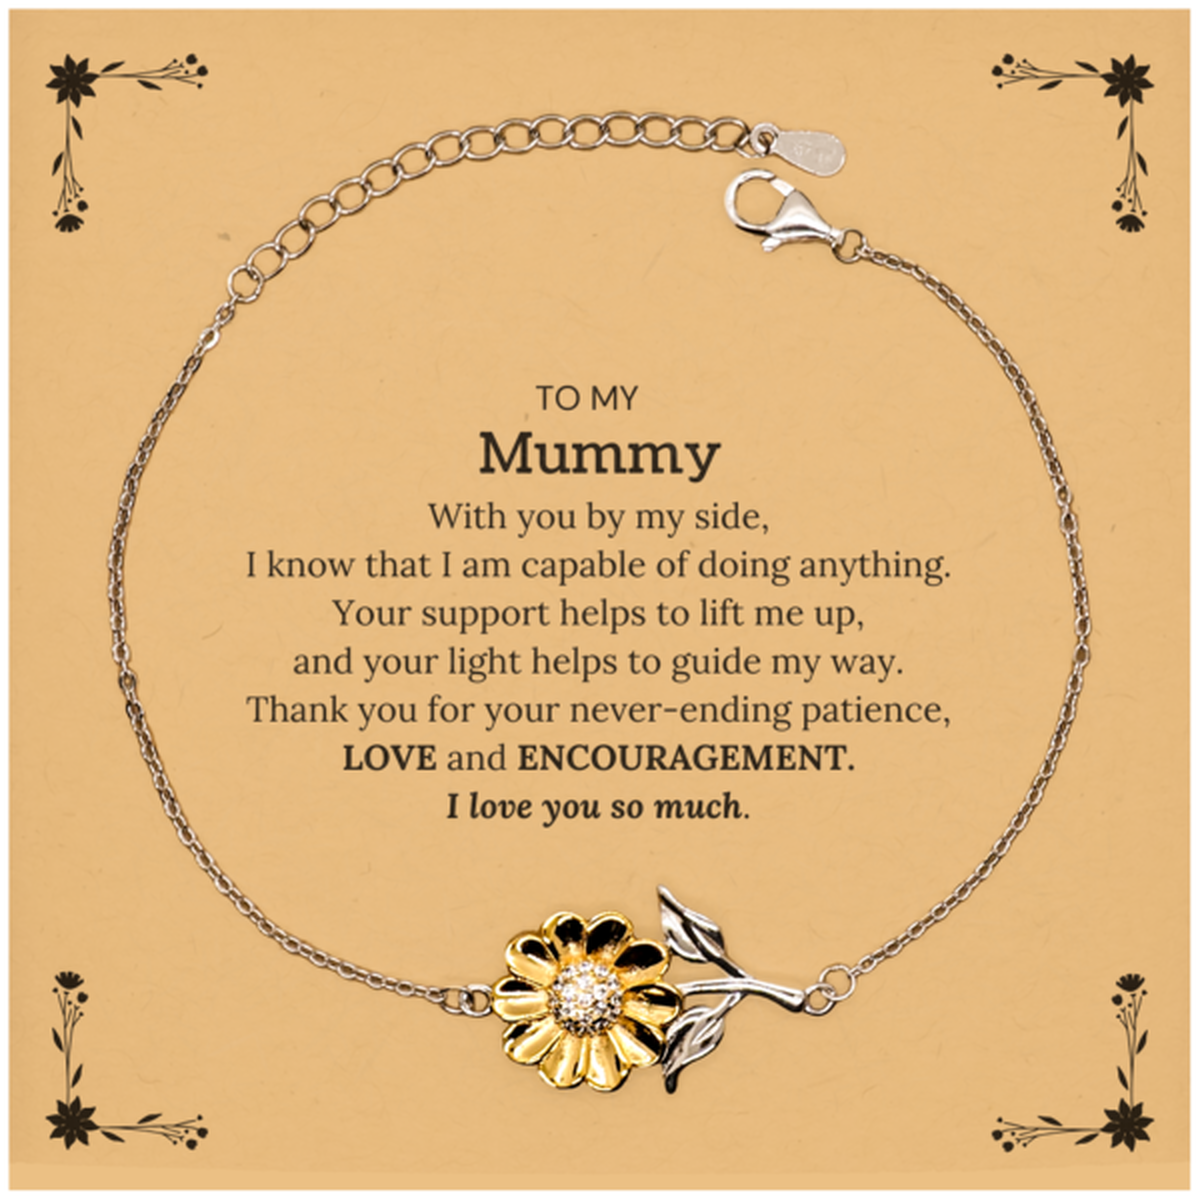 Appreciation Mummy Sunflower Bracelet Gifts, To My Mummy Birthday Christmas Wedding Keepsake Gifts for Mummy With you by my side, I know that I am capable of doing anything. I love you so much